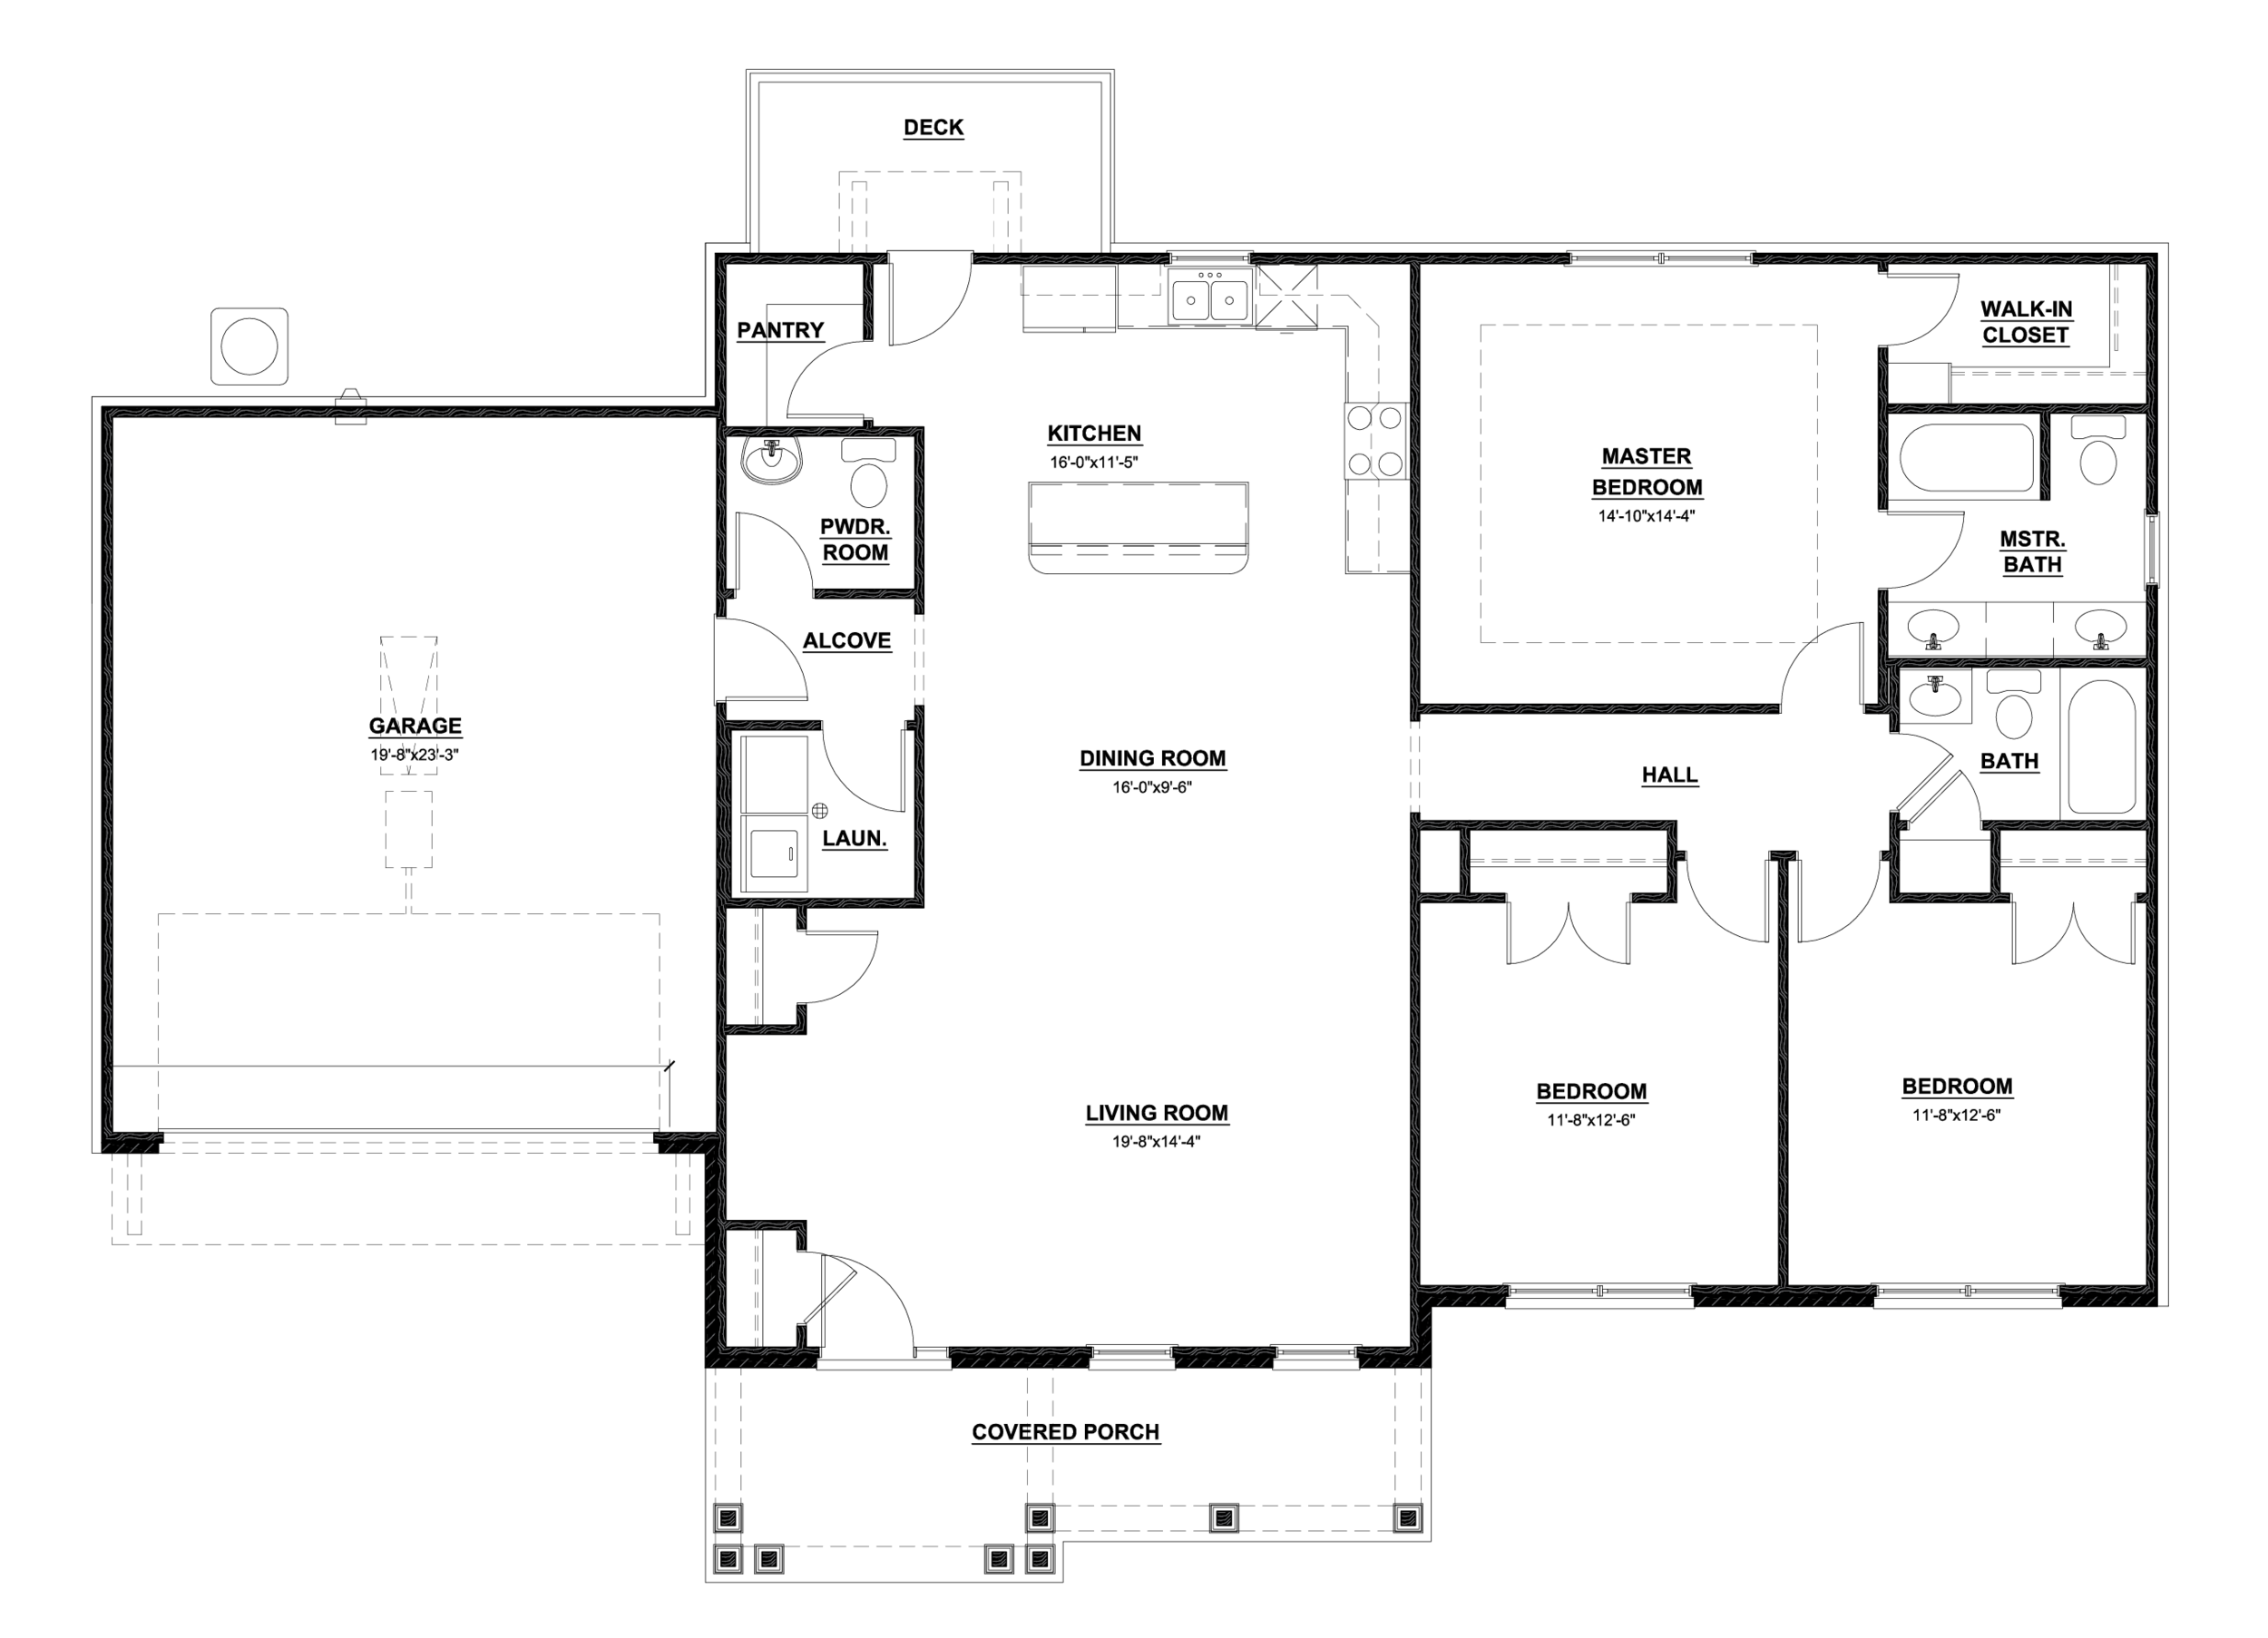 The Foley House Plan_Artboard 2.png